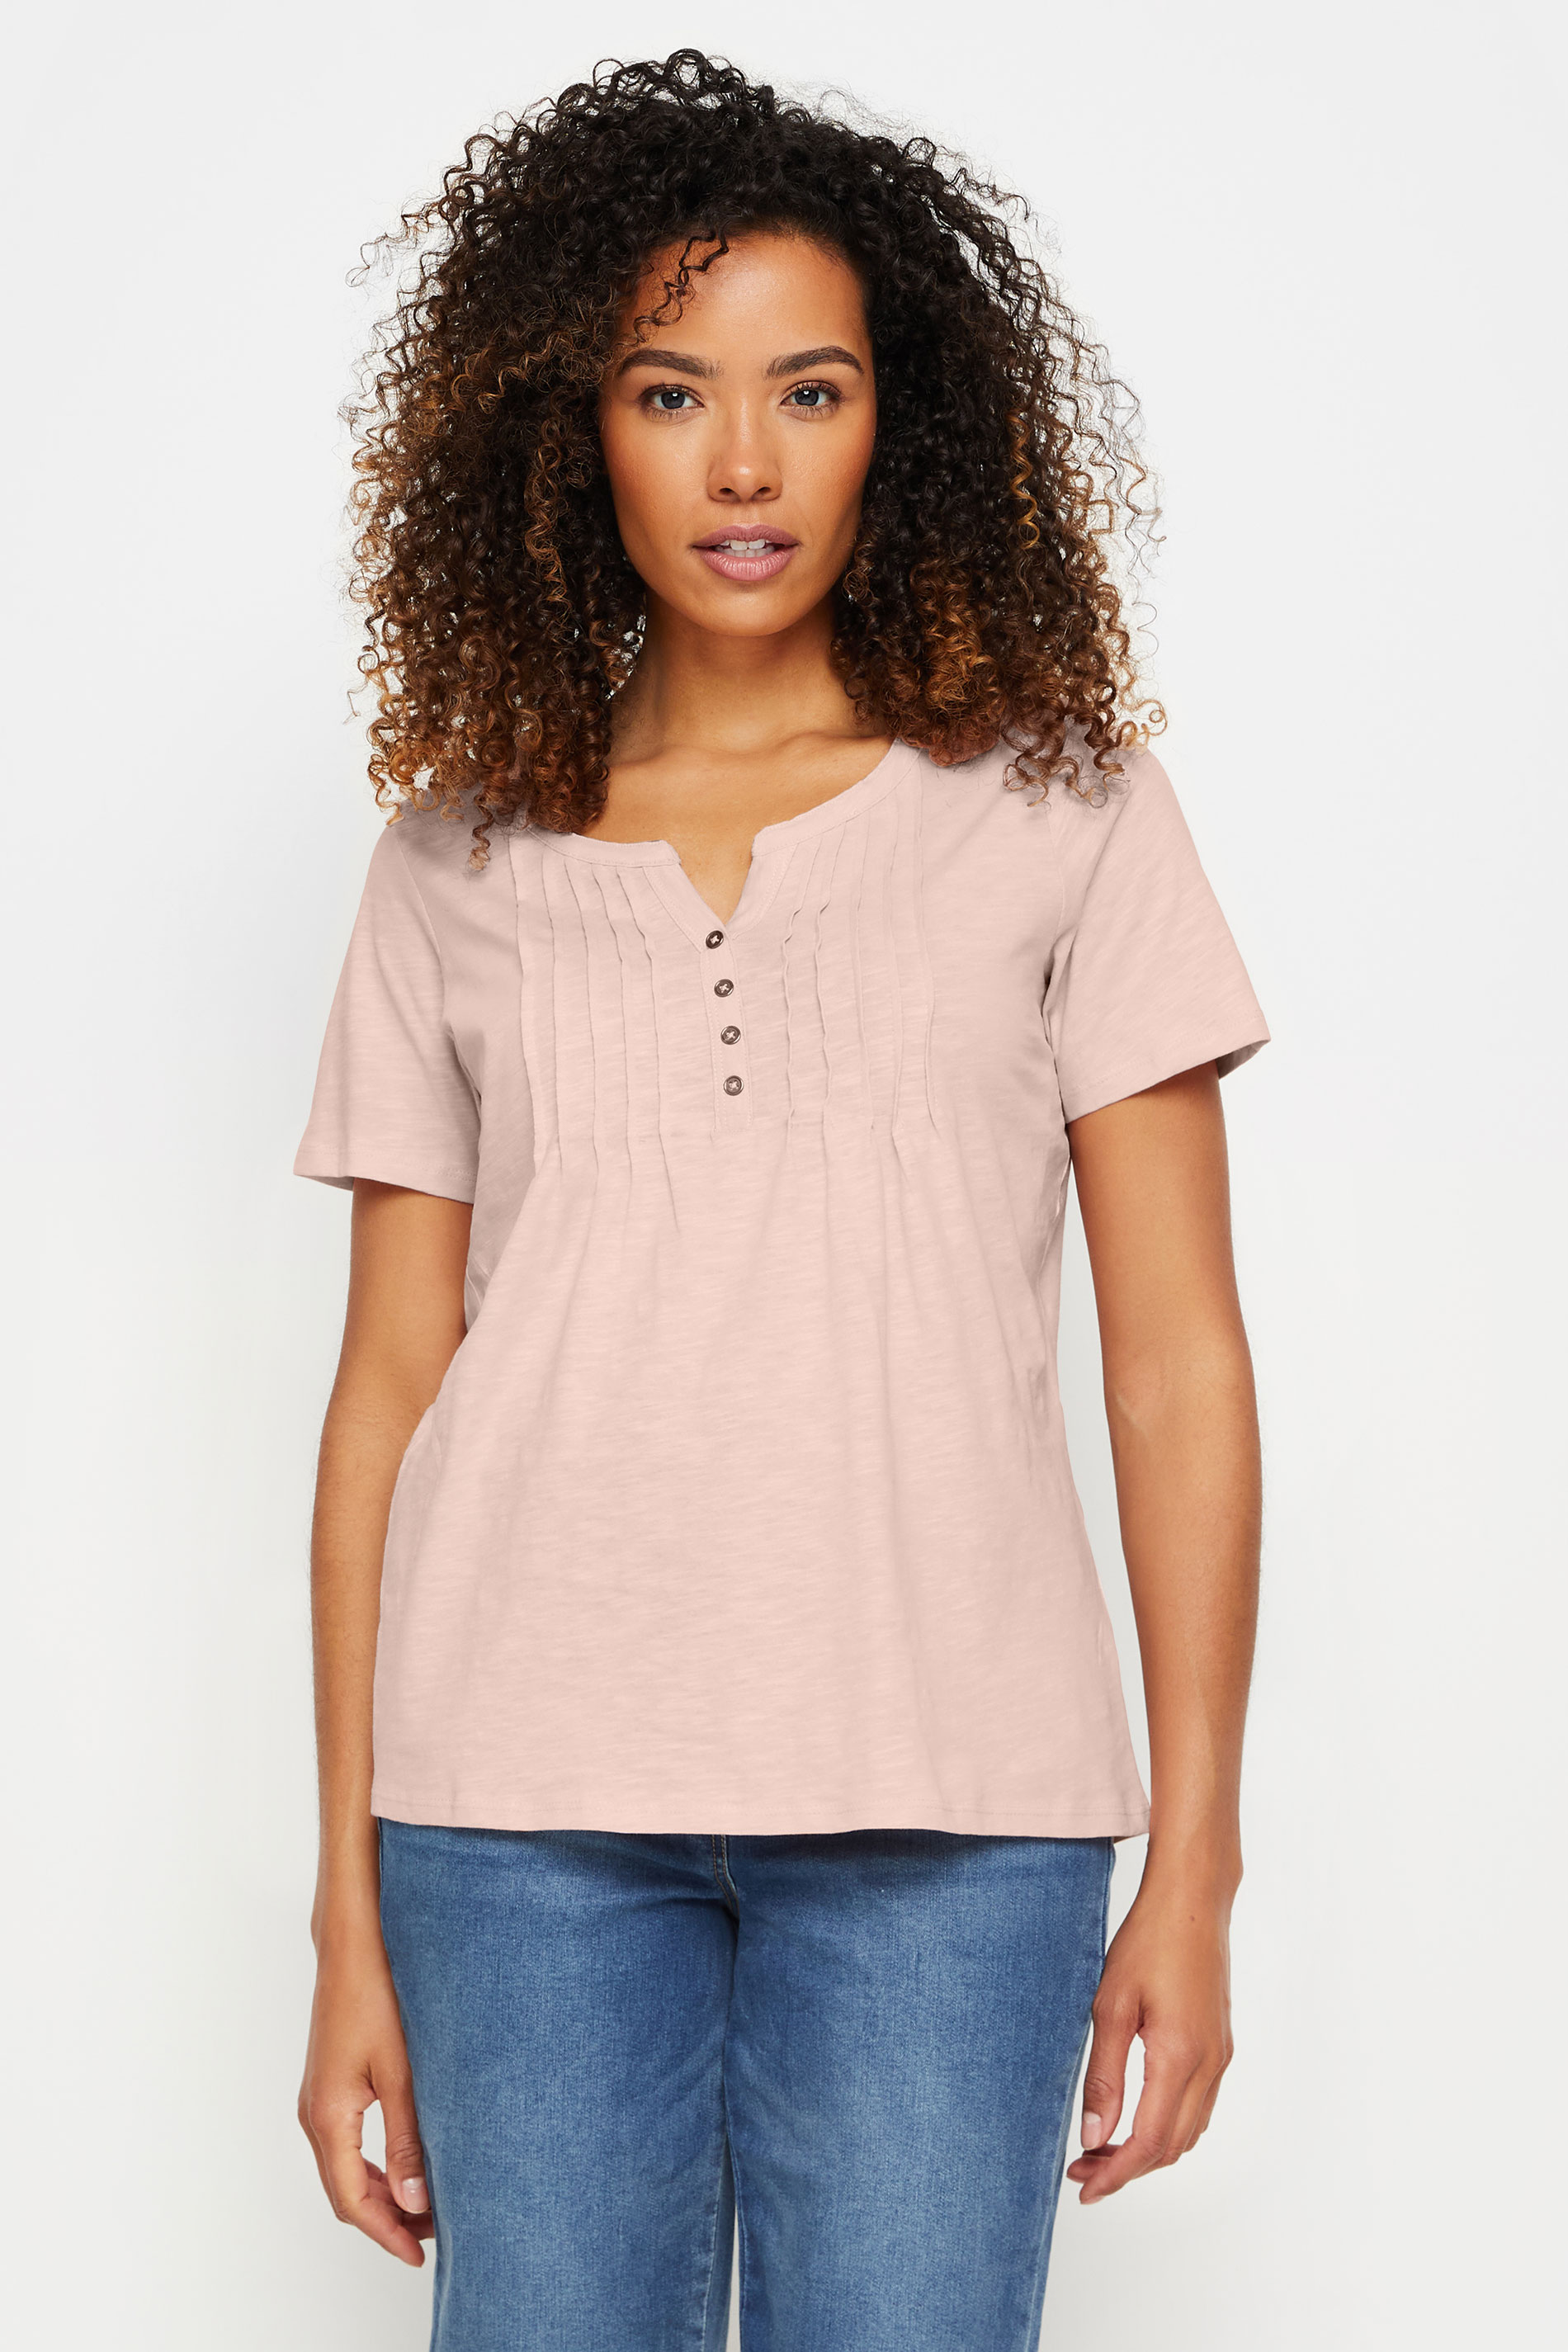 M&Co Pink Cotton Short Sleeve Henley Top | M&Co 1